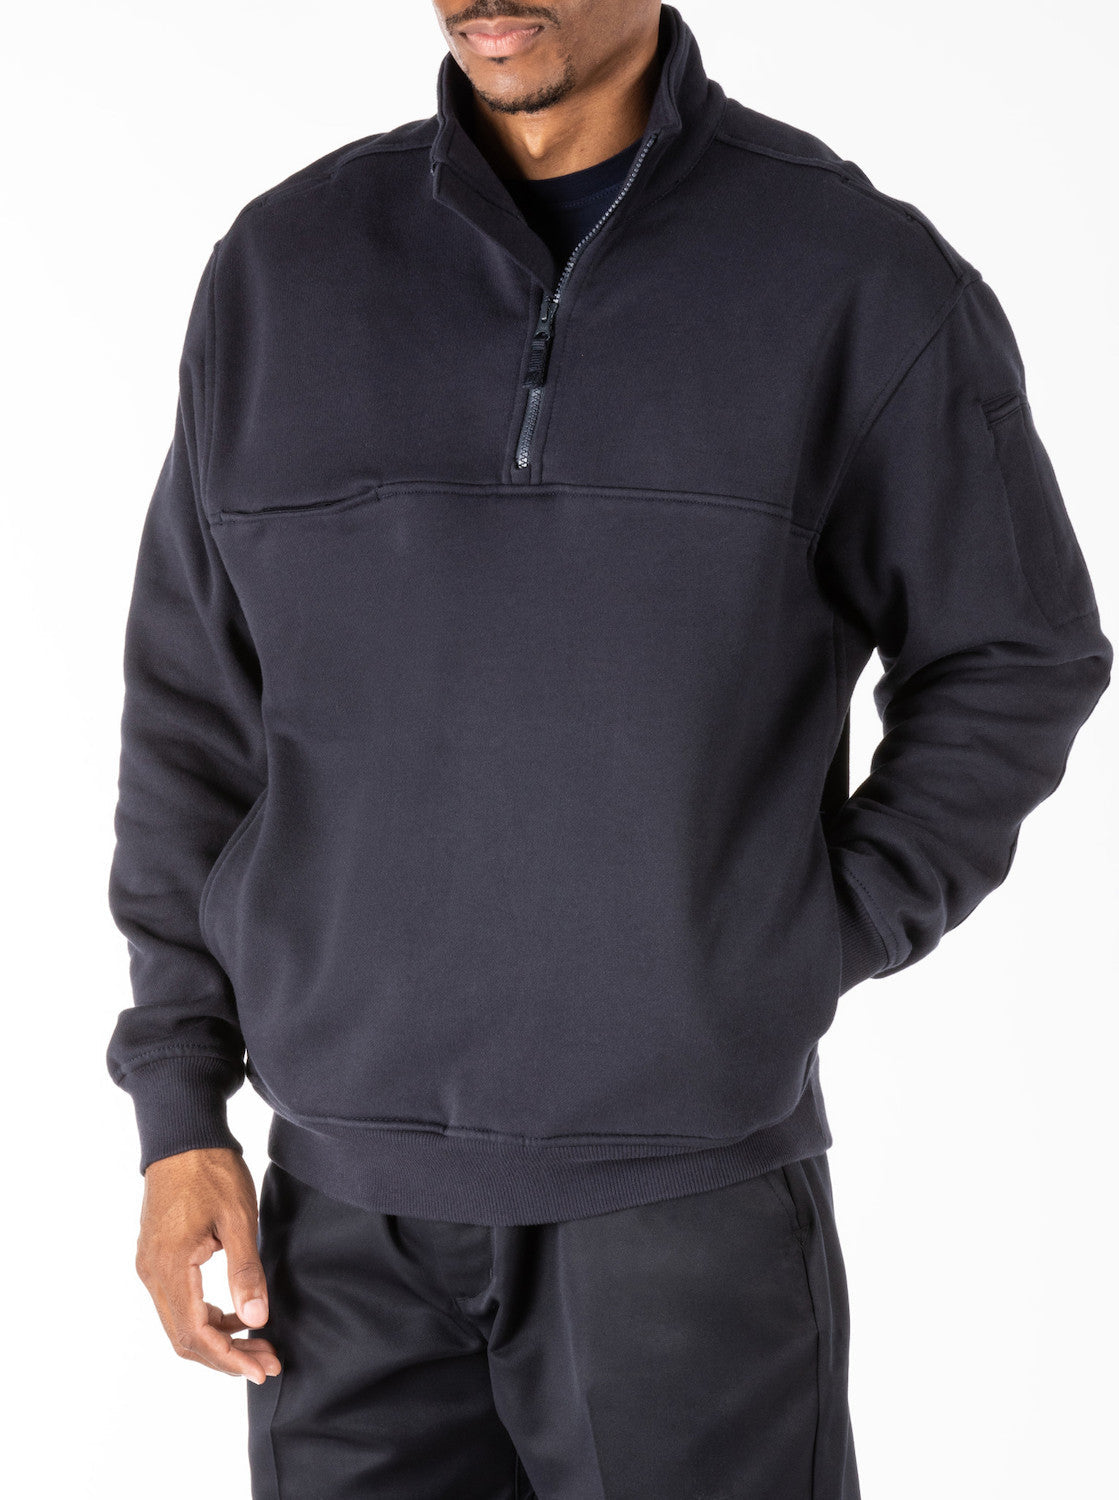 Pflugerville | 5.11 Tactical 1/4 Zip Job Shirt (72314) | The Fire Center | The Fire Store | Store | Fuego Fire Center | Made specifically for Fire professionals, the poly/cotton fleece 5.11 Job Shirt provides functionality and comfort. Since the beginning of their company, 5.11 Tactical has been built their products with the direct involvement of emergency services professionals. Thus, when they decided to introduce a full line of products for fire and EMS professionals,